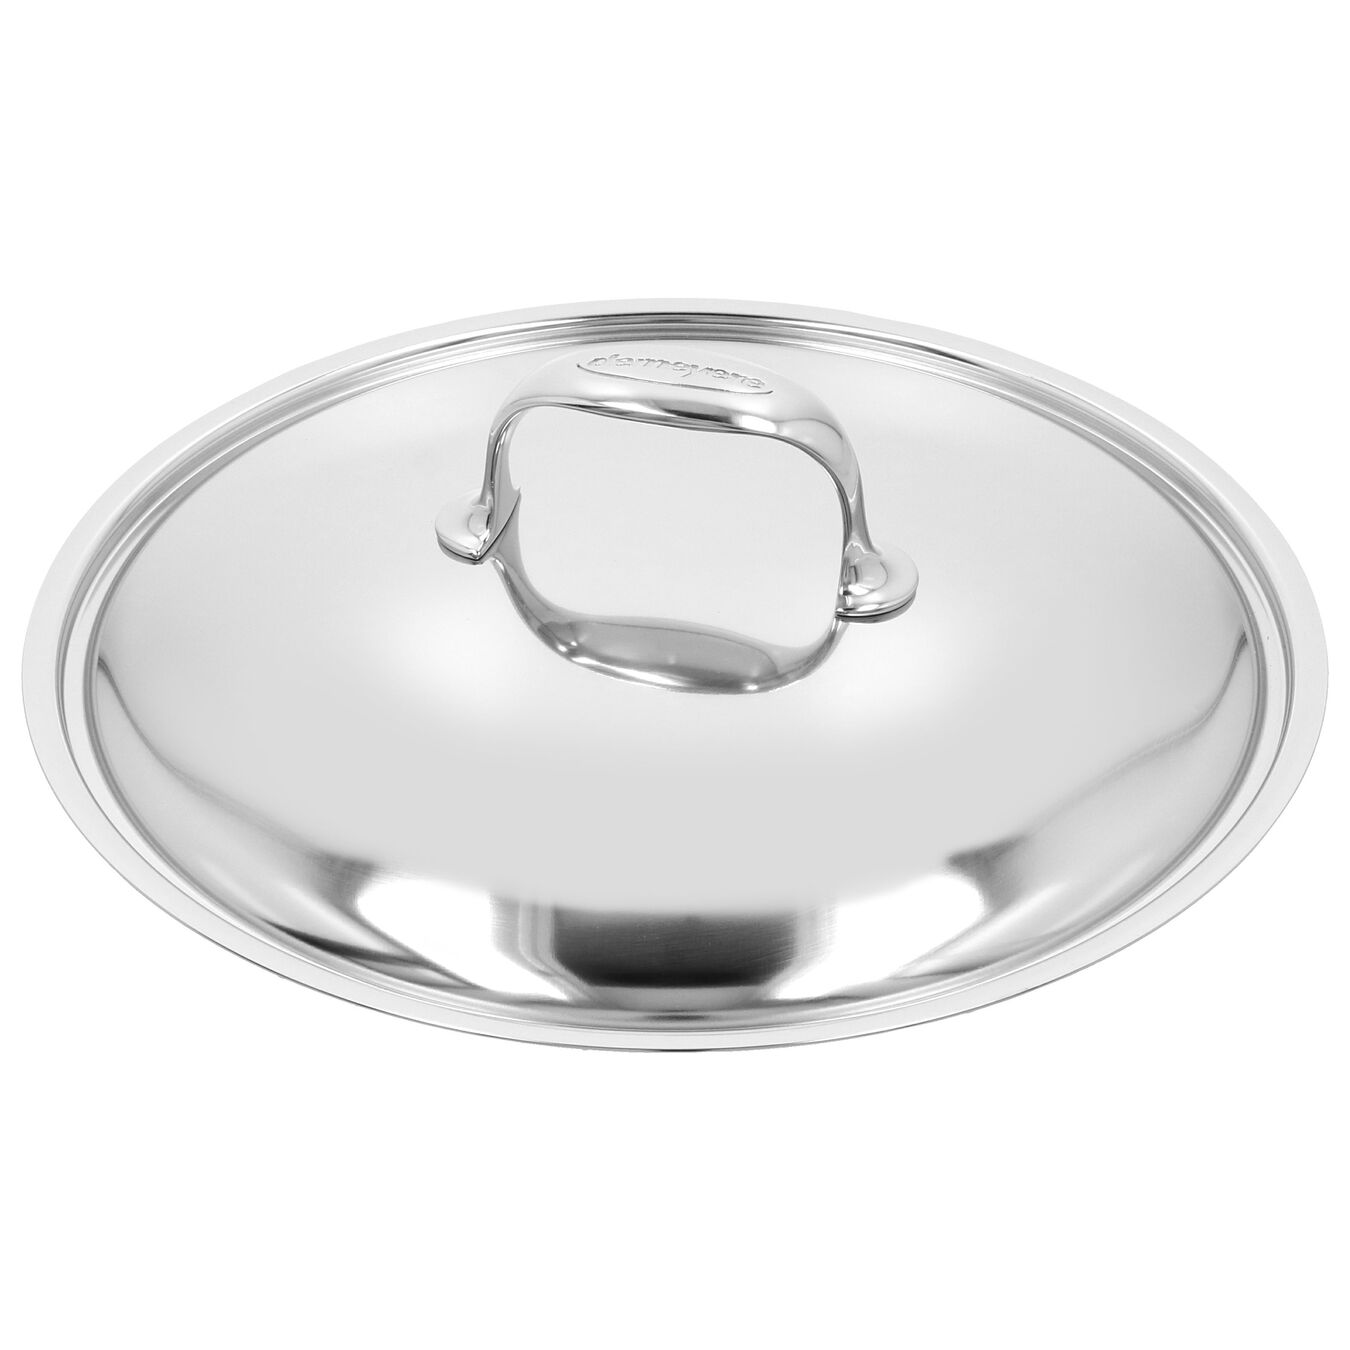 11-inch Sauté Pan with Helper Handle and Lid, 18/10 Stainless Steel ,,large 3